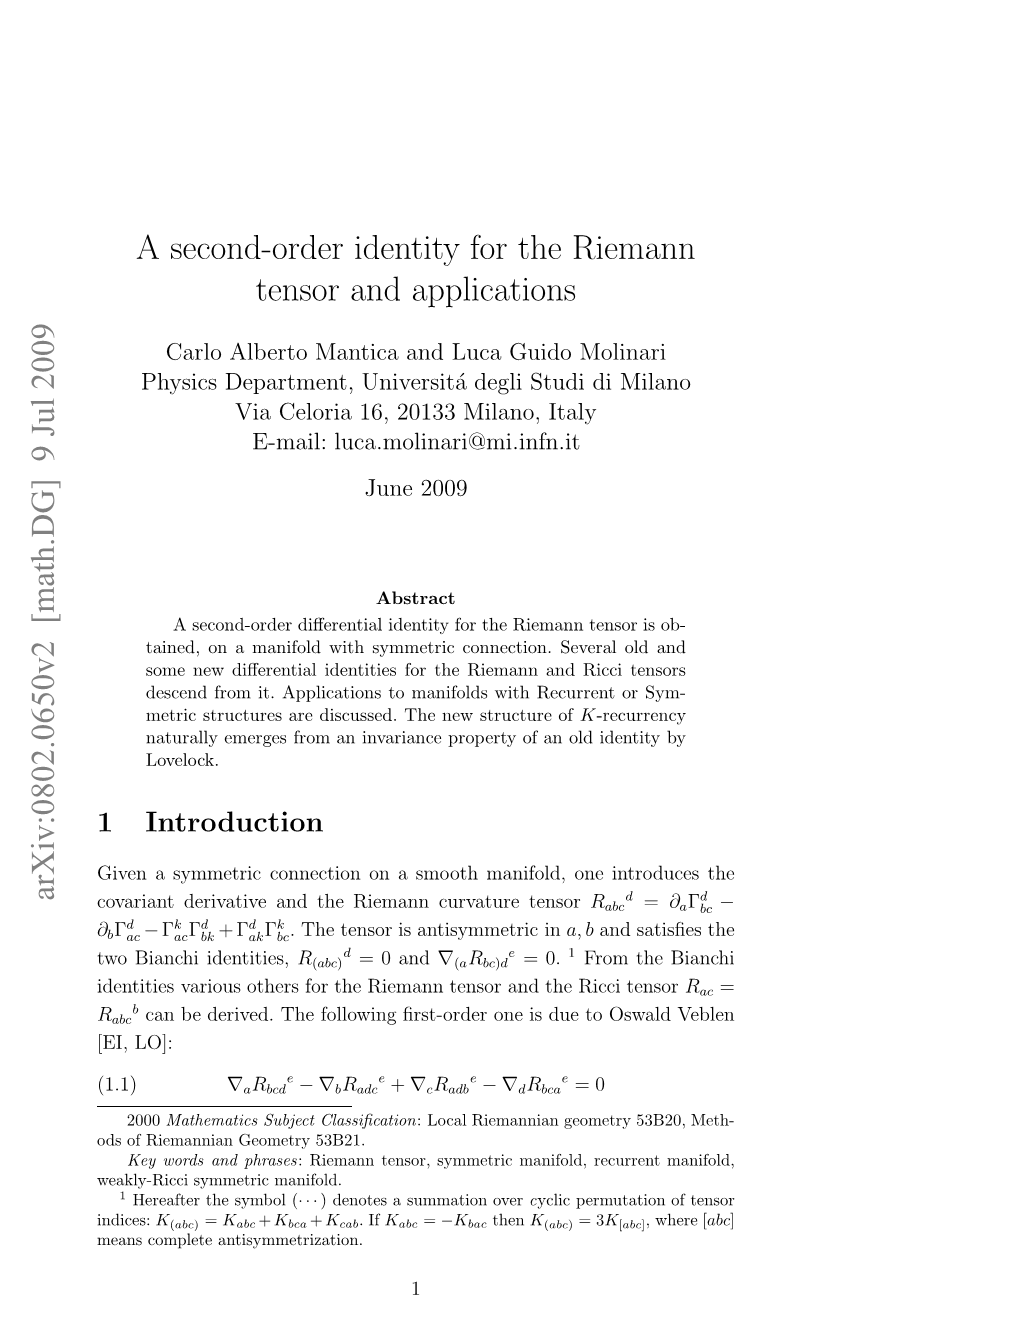 A Second-Order Identity for the Riemann Tensor and Applications